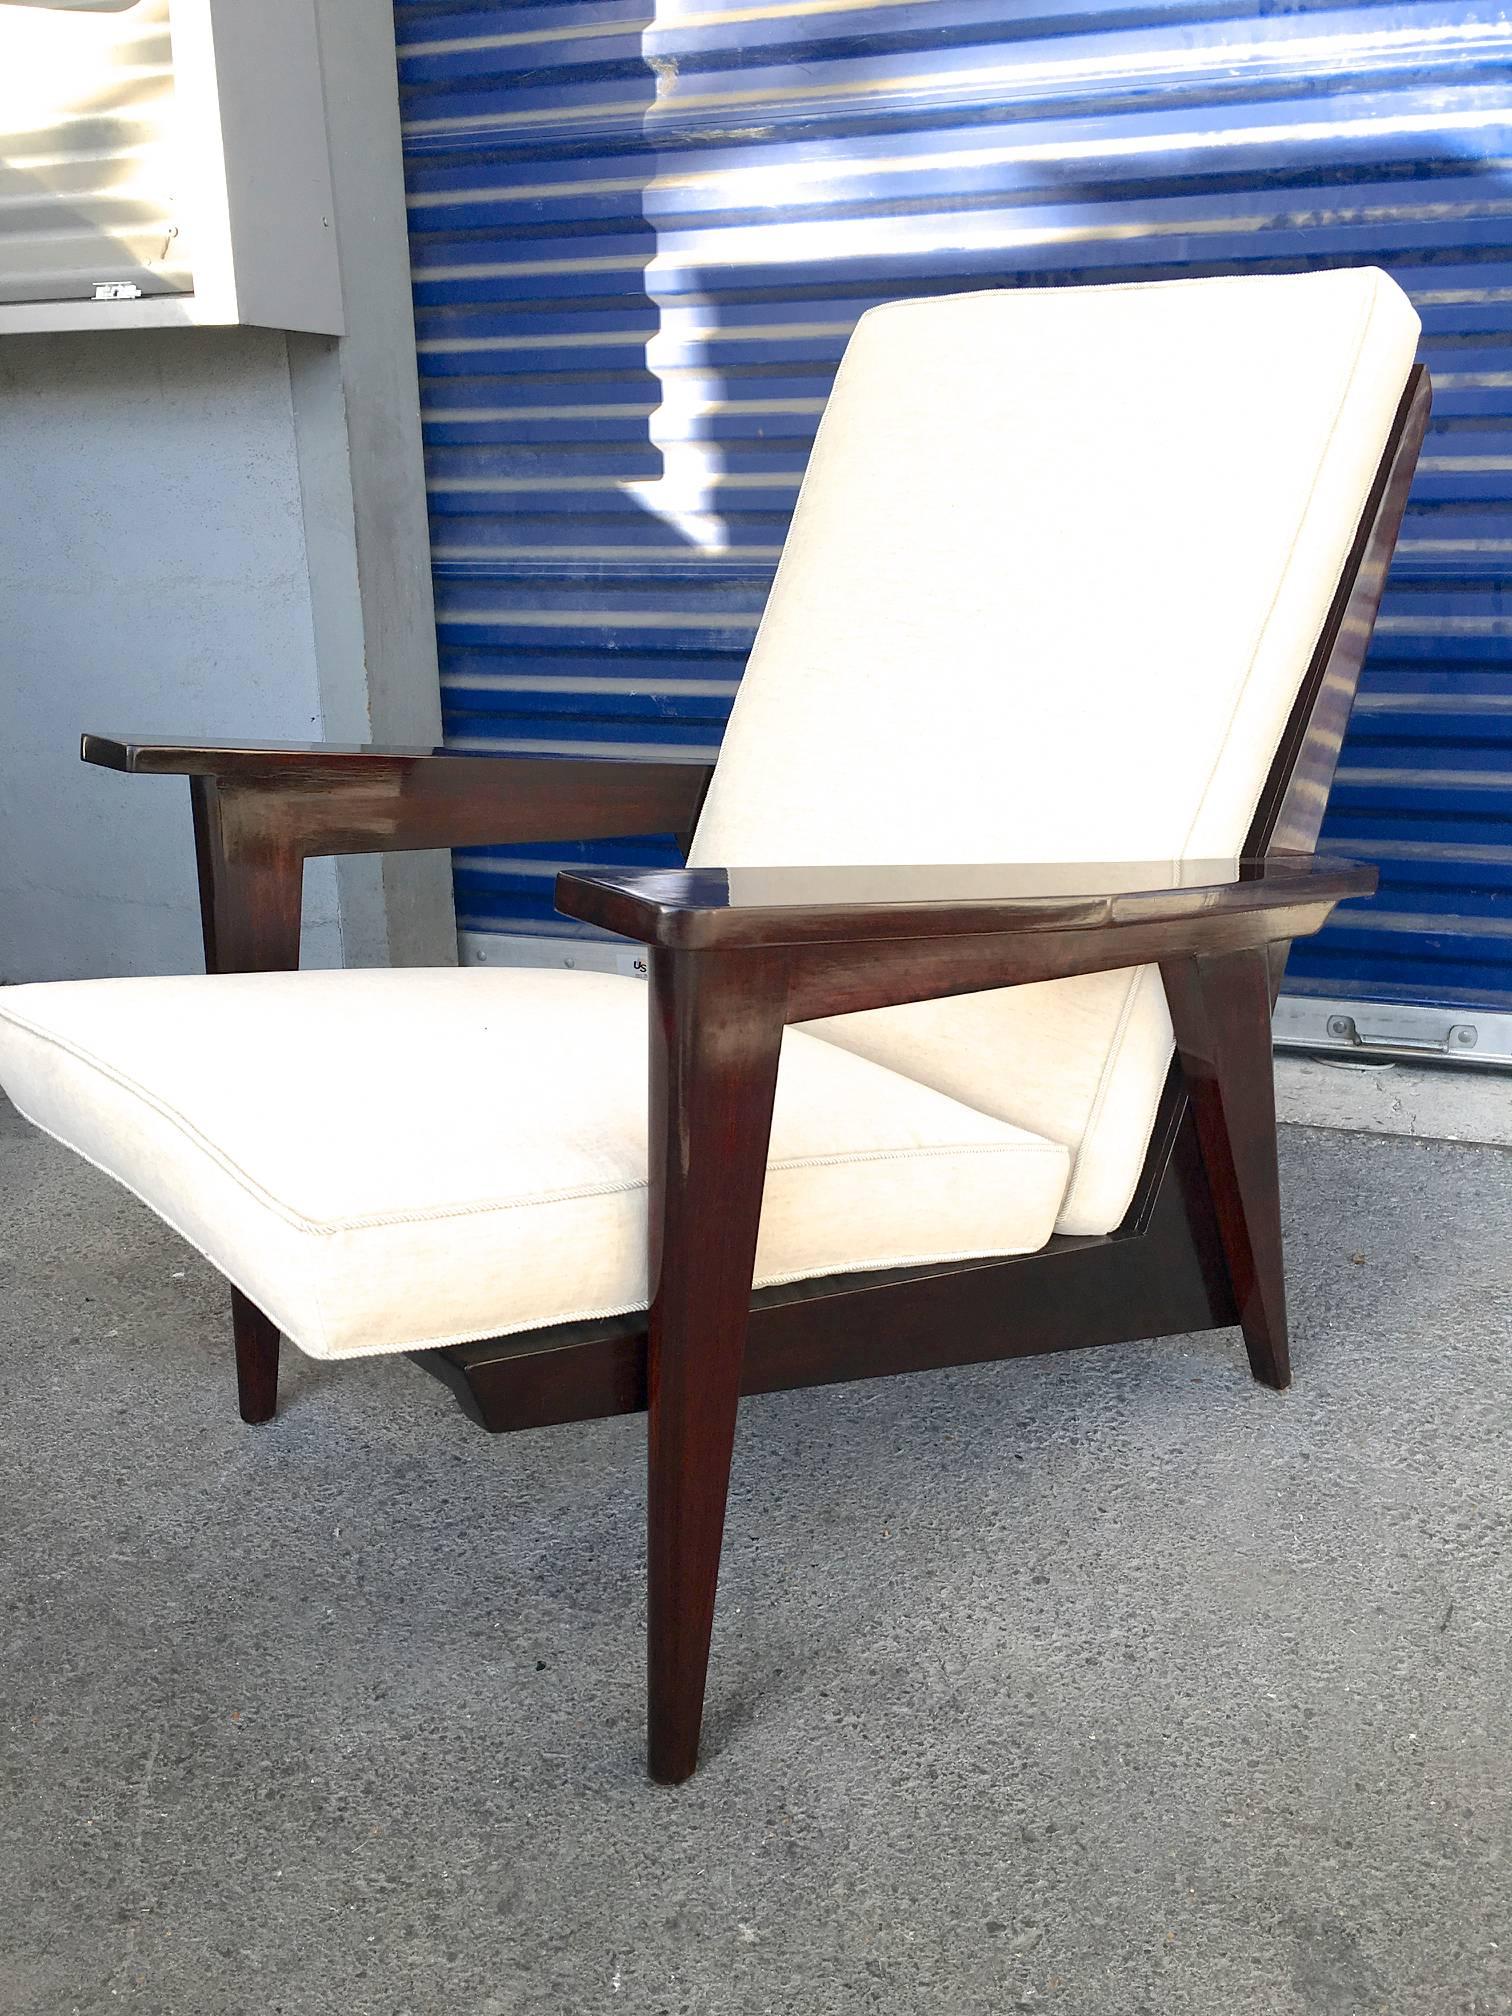 Style of Pierre Jeanneret 1950s with pair of lounge chair.